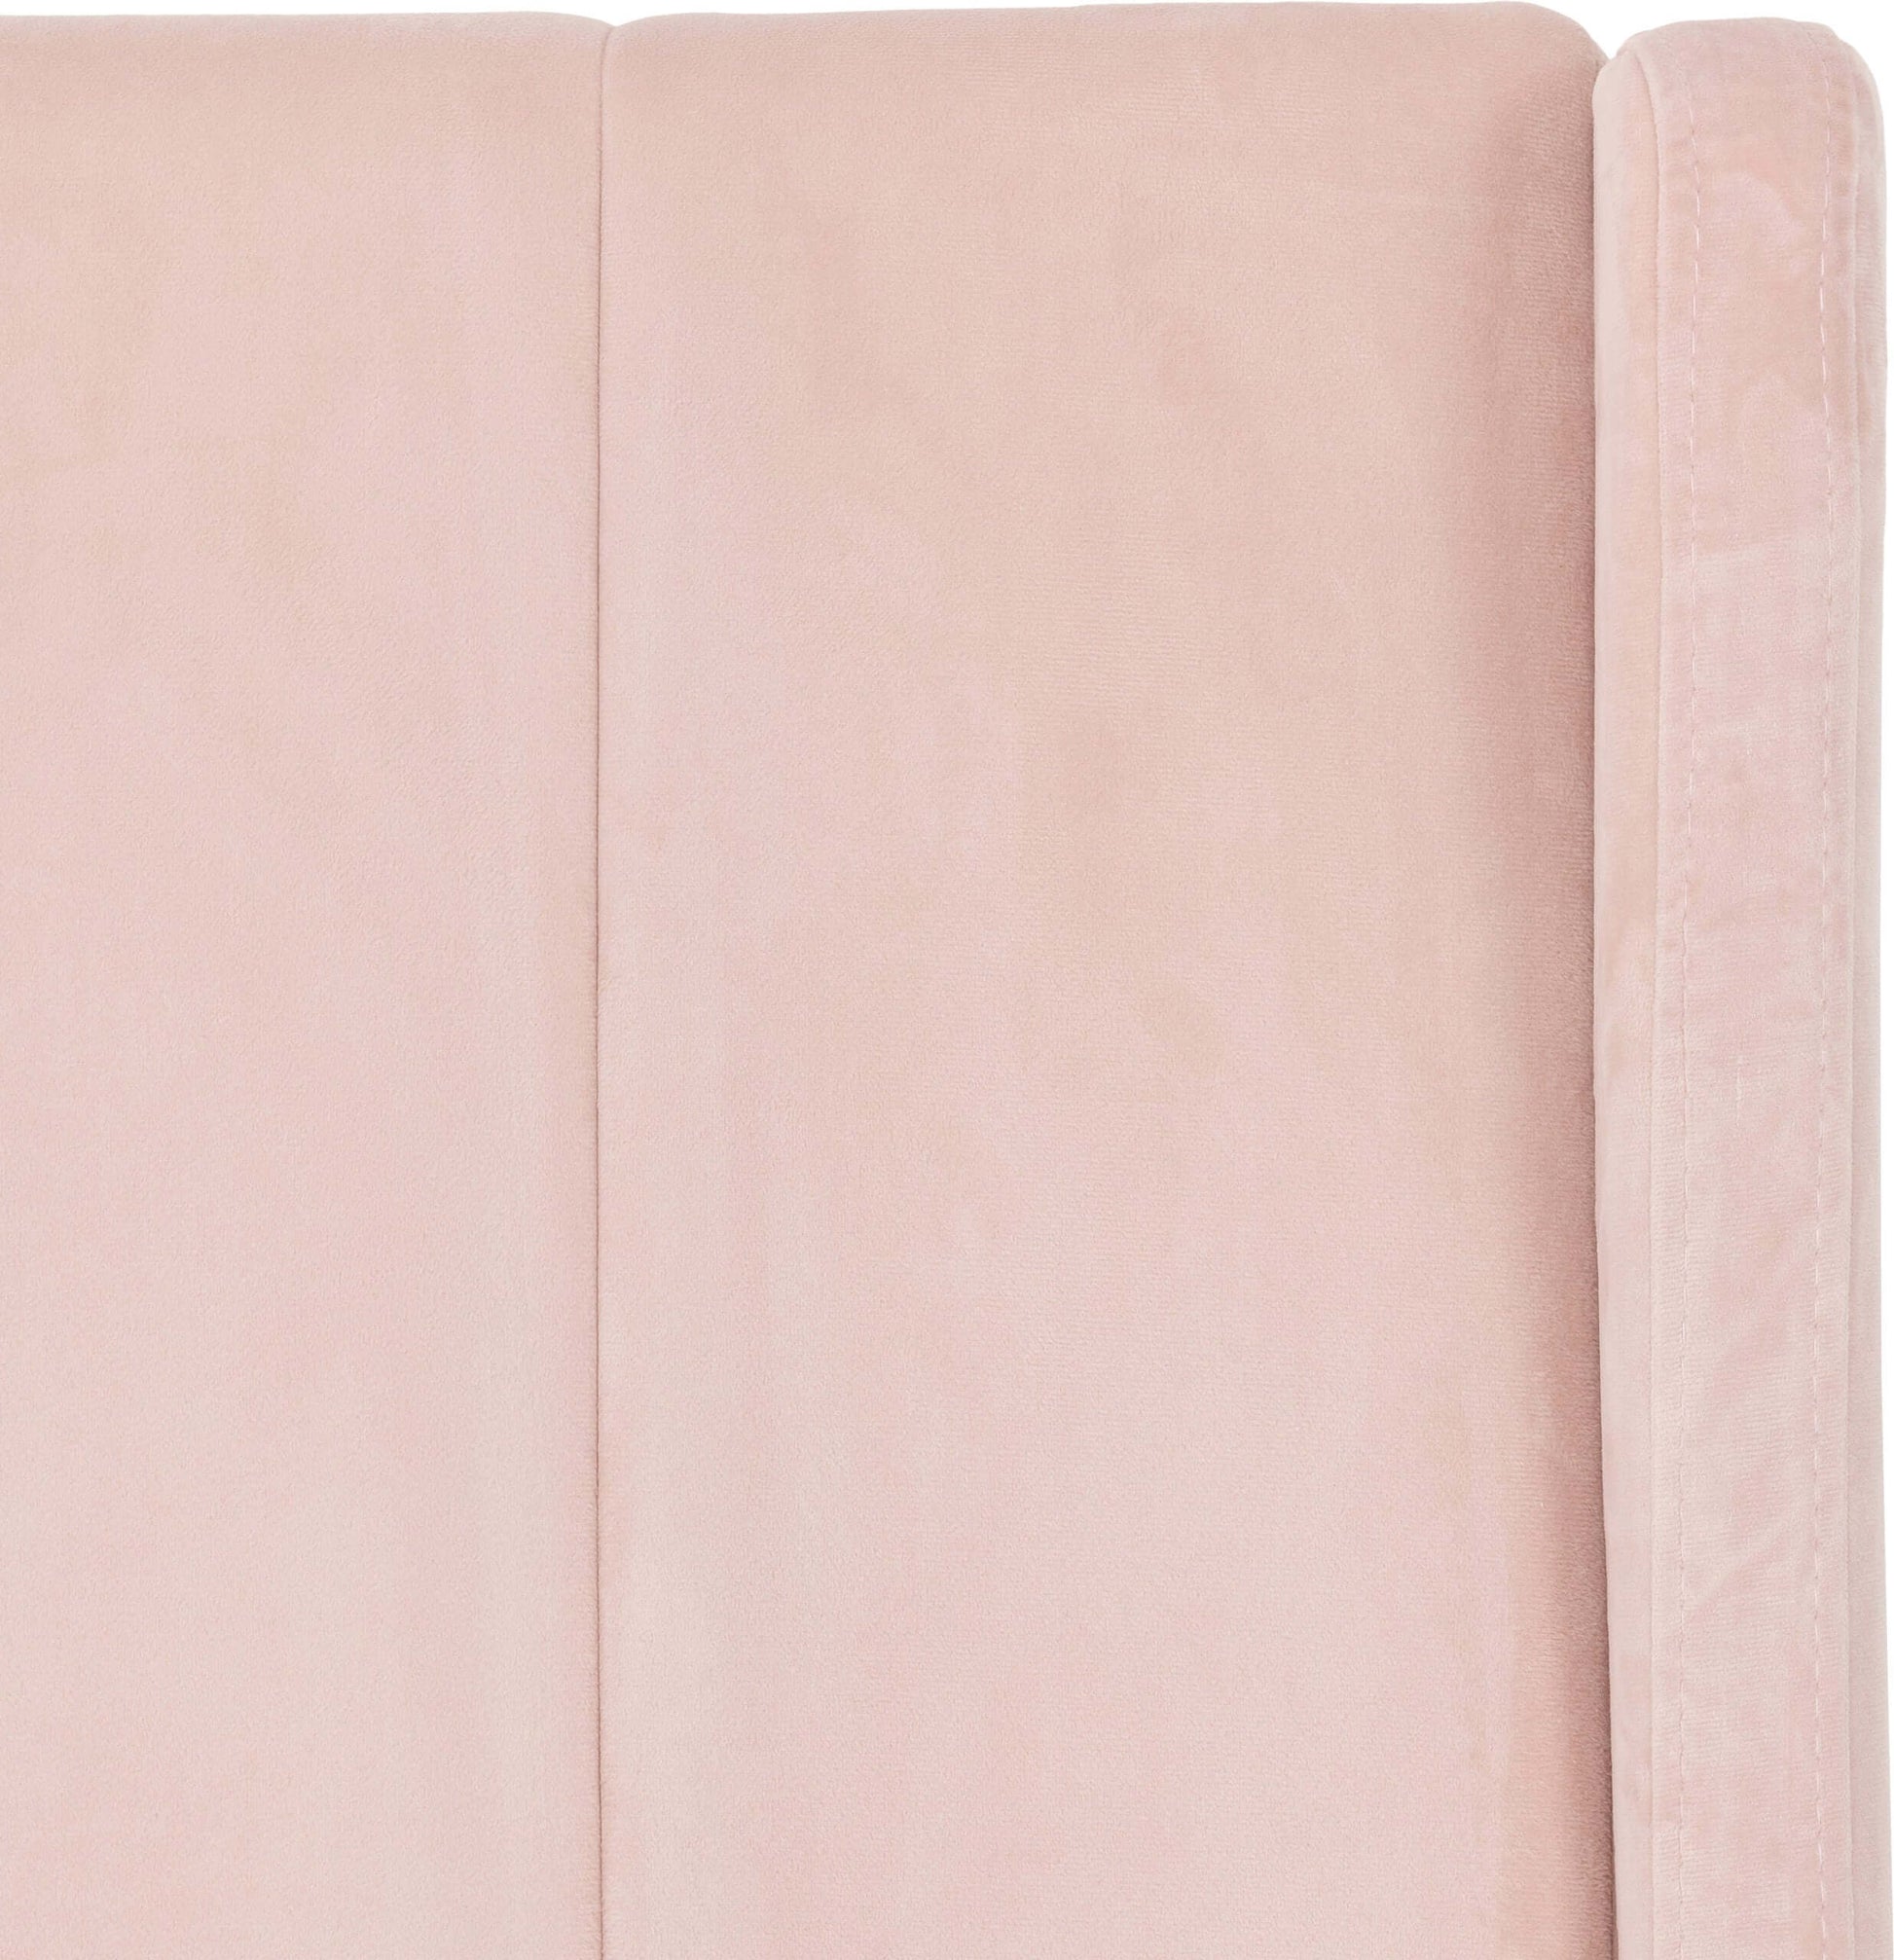 Amelia 3' Bed Pink Velvet Fabric- The Right Buy Store